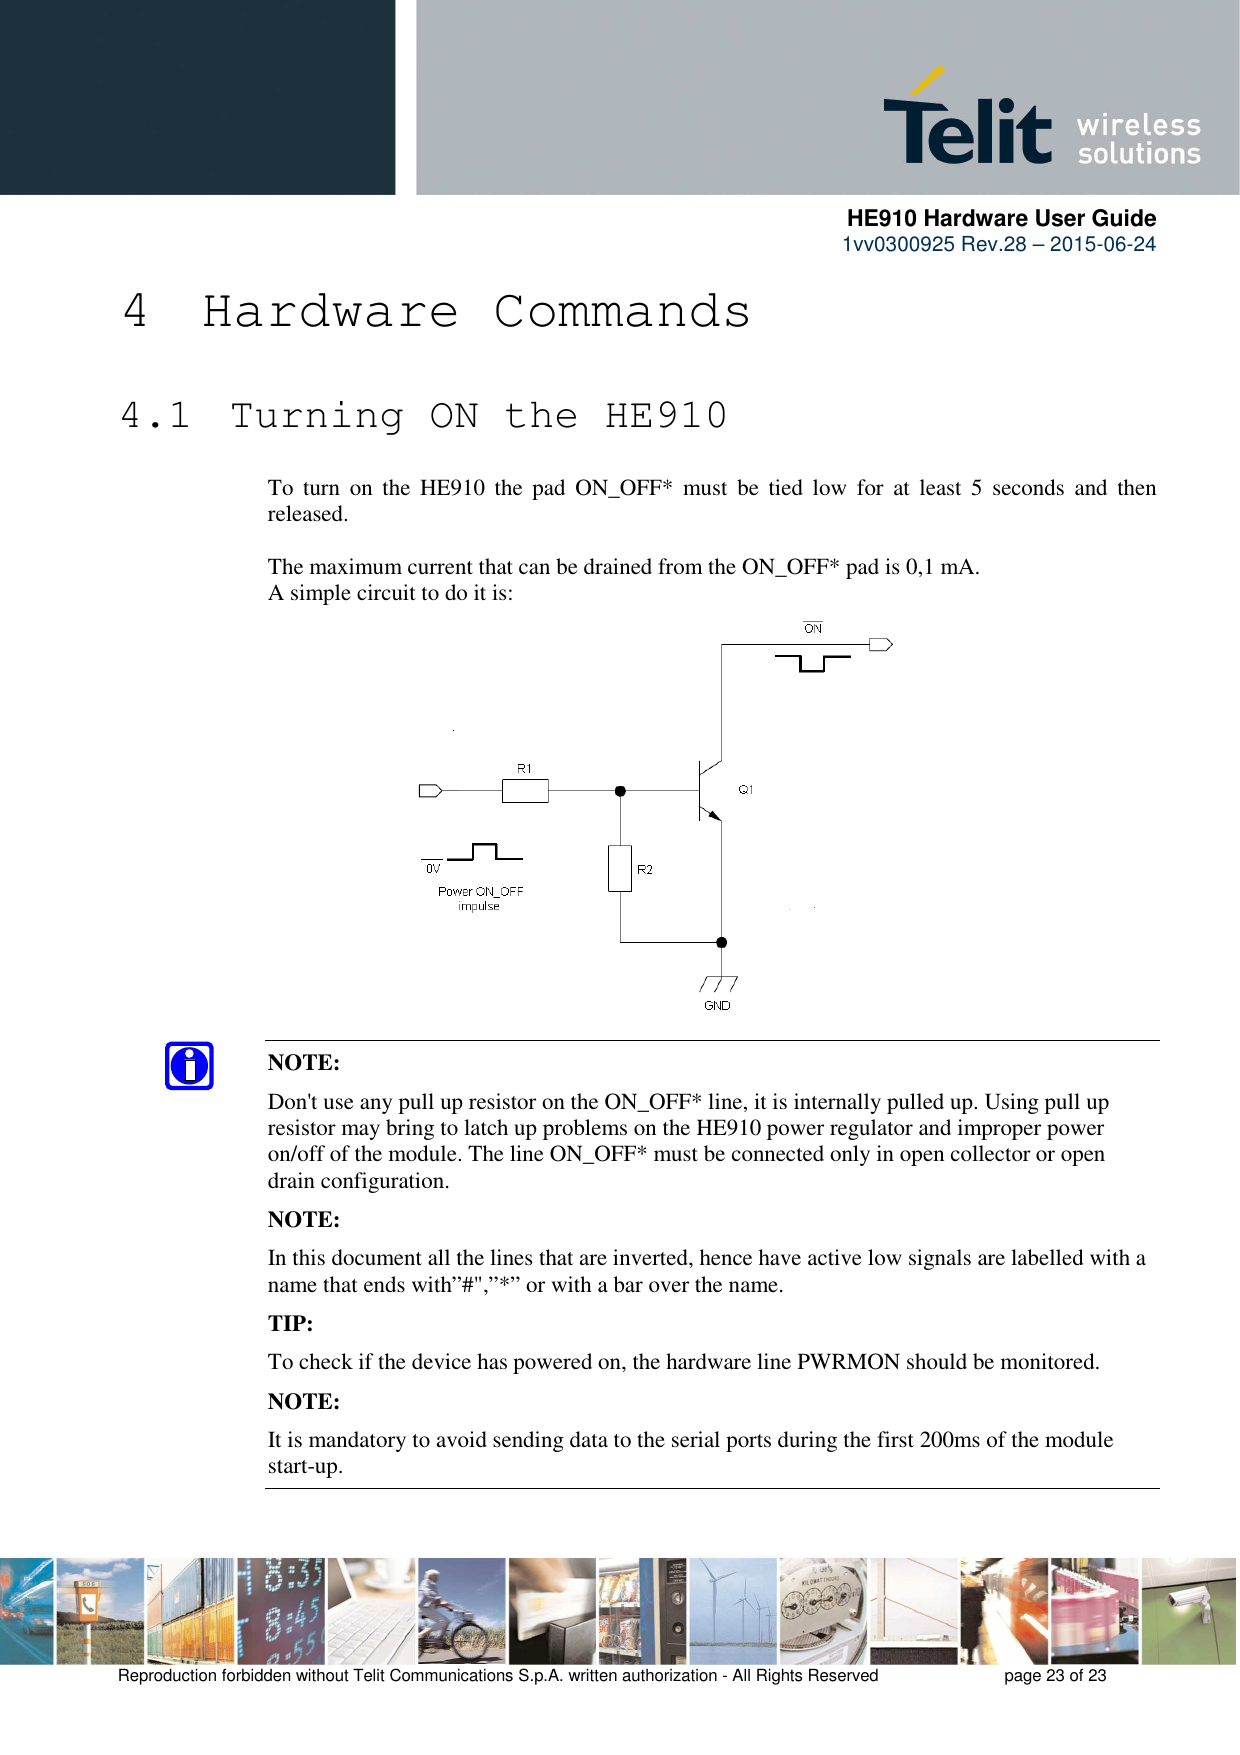      HE910 Hardware User Guide 1vv0300925 Rev.28 – 2015-06-24    Reproduction forbidden without Telit Communications S.p.A. written authorization - All Rights Reserved    page 23 of 23  4 Hardware Commands 4.1  Turning ON the HE910 To  turn  on  the  HE910  the  pad  ON_OFF*  must  be  tied  low  for  at  least  5  seconds  and  then released.  The maximum current that can be drained from the ON_OFF* pad is 0,1 mA. A simple circuit to do it is:                 NOTE: Don&apos;t use any pull up resistor on the ON_OFF* line, it is internally pulled up. Using pull up resistor may bring to latch up problems on the HE910 power regulator and improper power on/off of the module. The line ON_OFF* must be connected only in open collector or open drain configuration. NOTE: In this document all the lines that are inverted, hence have active low signals are labelled with a name that ends with”#&quot;,”*” or with a bar over the name. TIP: To check if the device has powered on, the hardware line PWRMON should be monitored. NOTE: It is mandatory to avoid sending data to the serial ports during the first 200ms of the module start-up. 